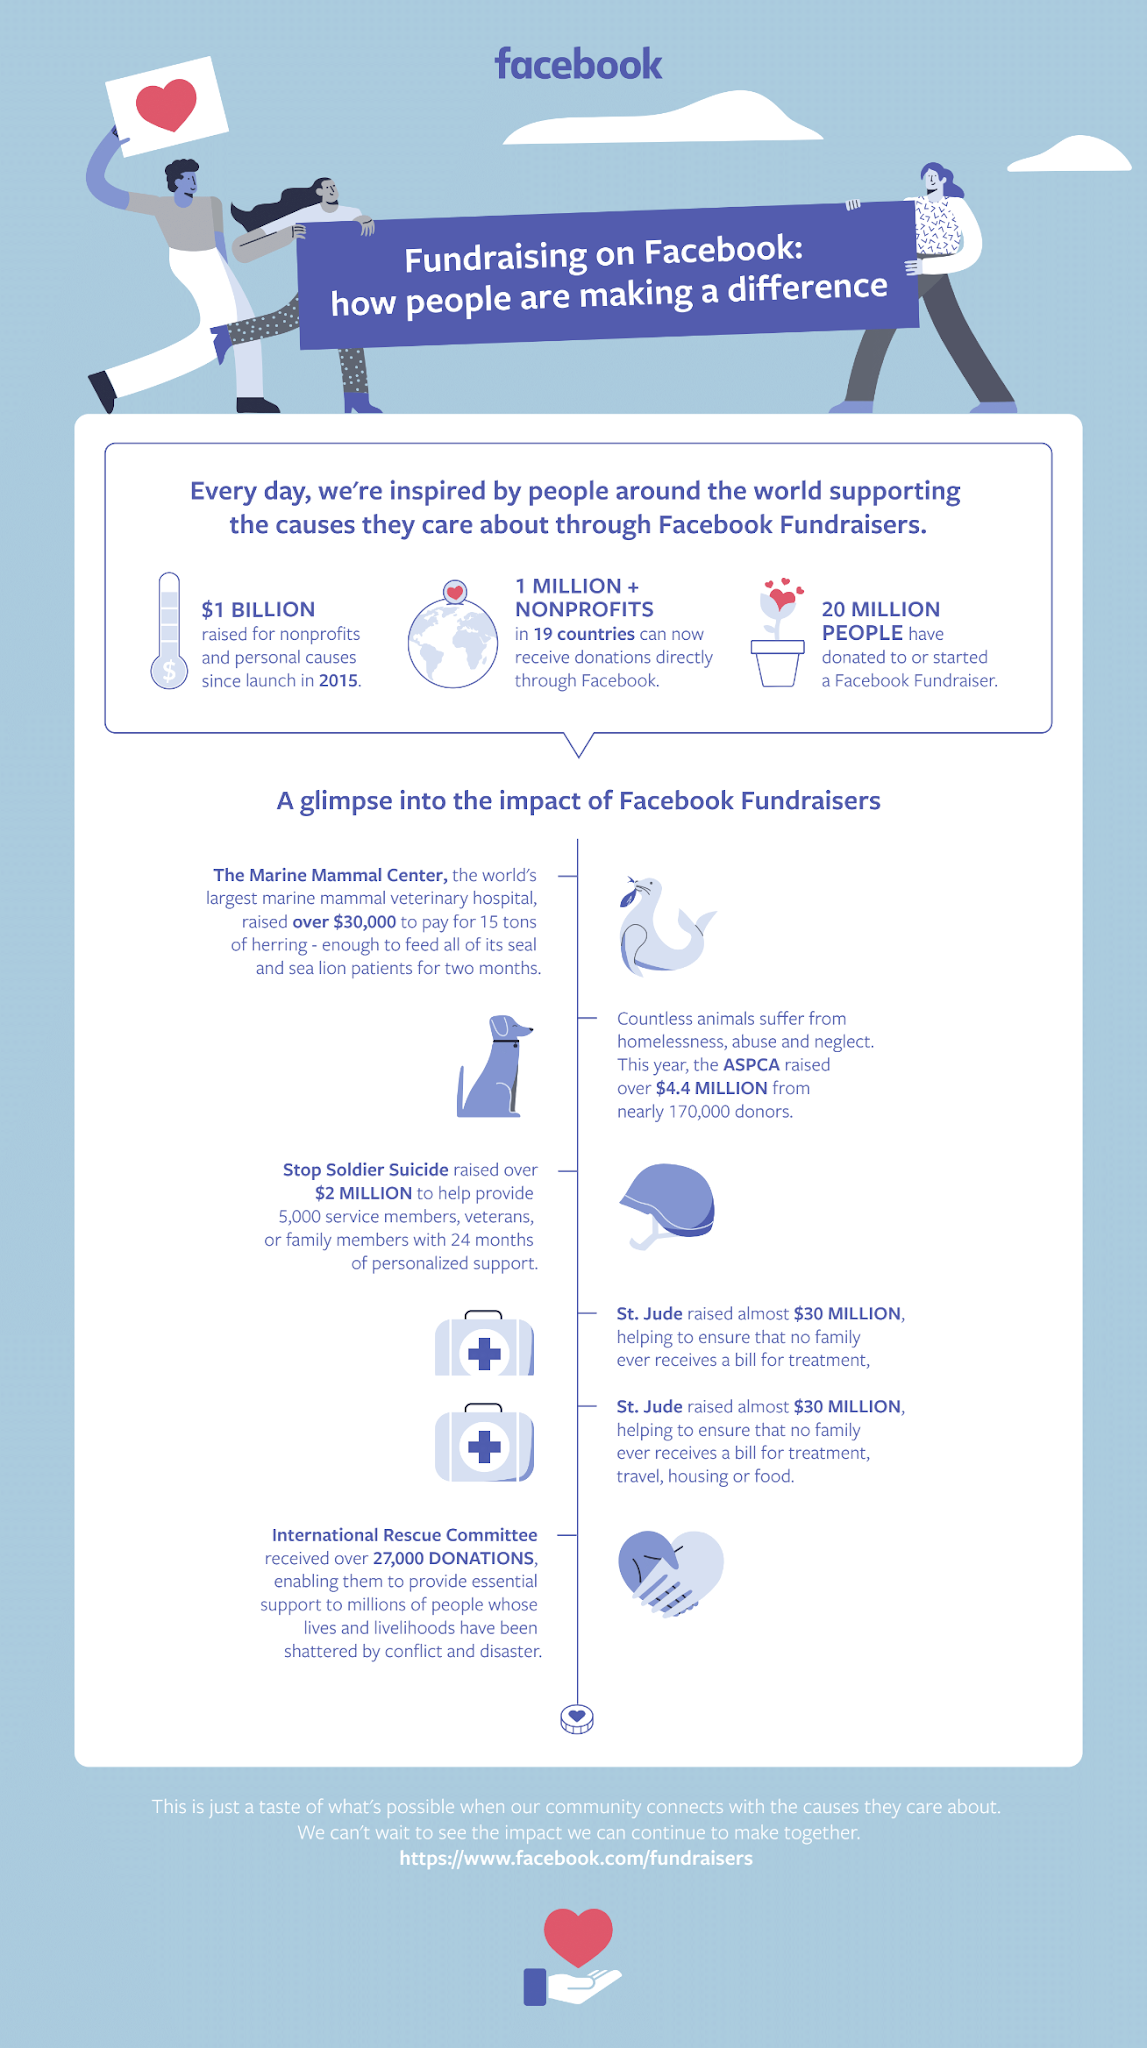 Facebook Fundraisers Have Raised Over a Billion Dollars Since Launch [Infographic]